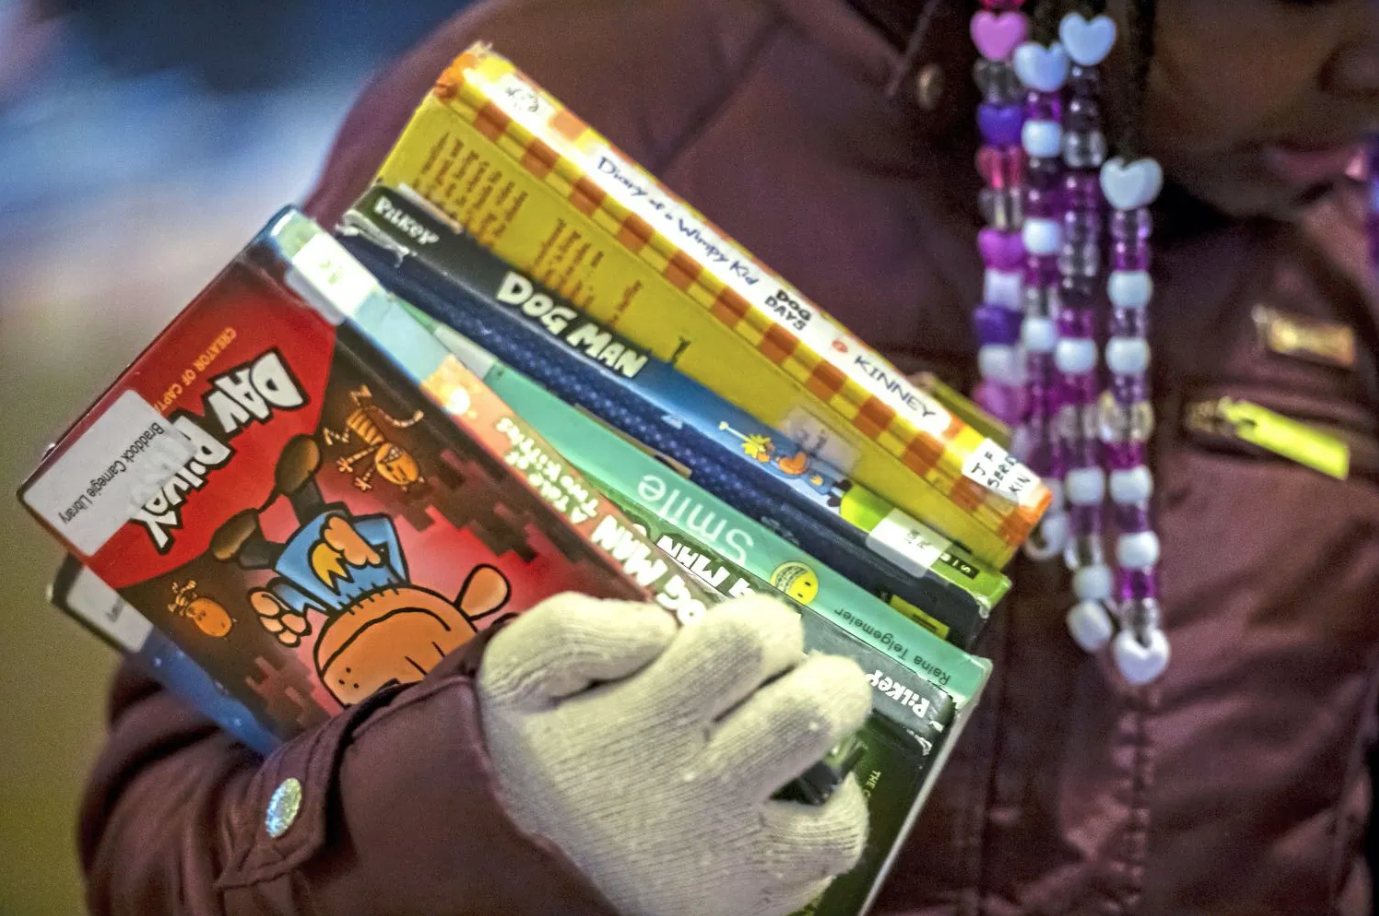 Kee’Miyah holds a stack of books that she plans on checking out from Braddock Carnegie Library. Image by Michael M. Santiago/Post-Gazette. United States, 2019.